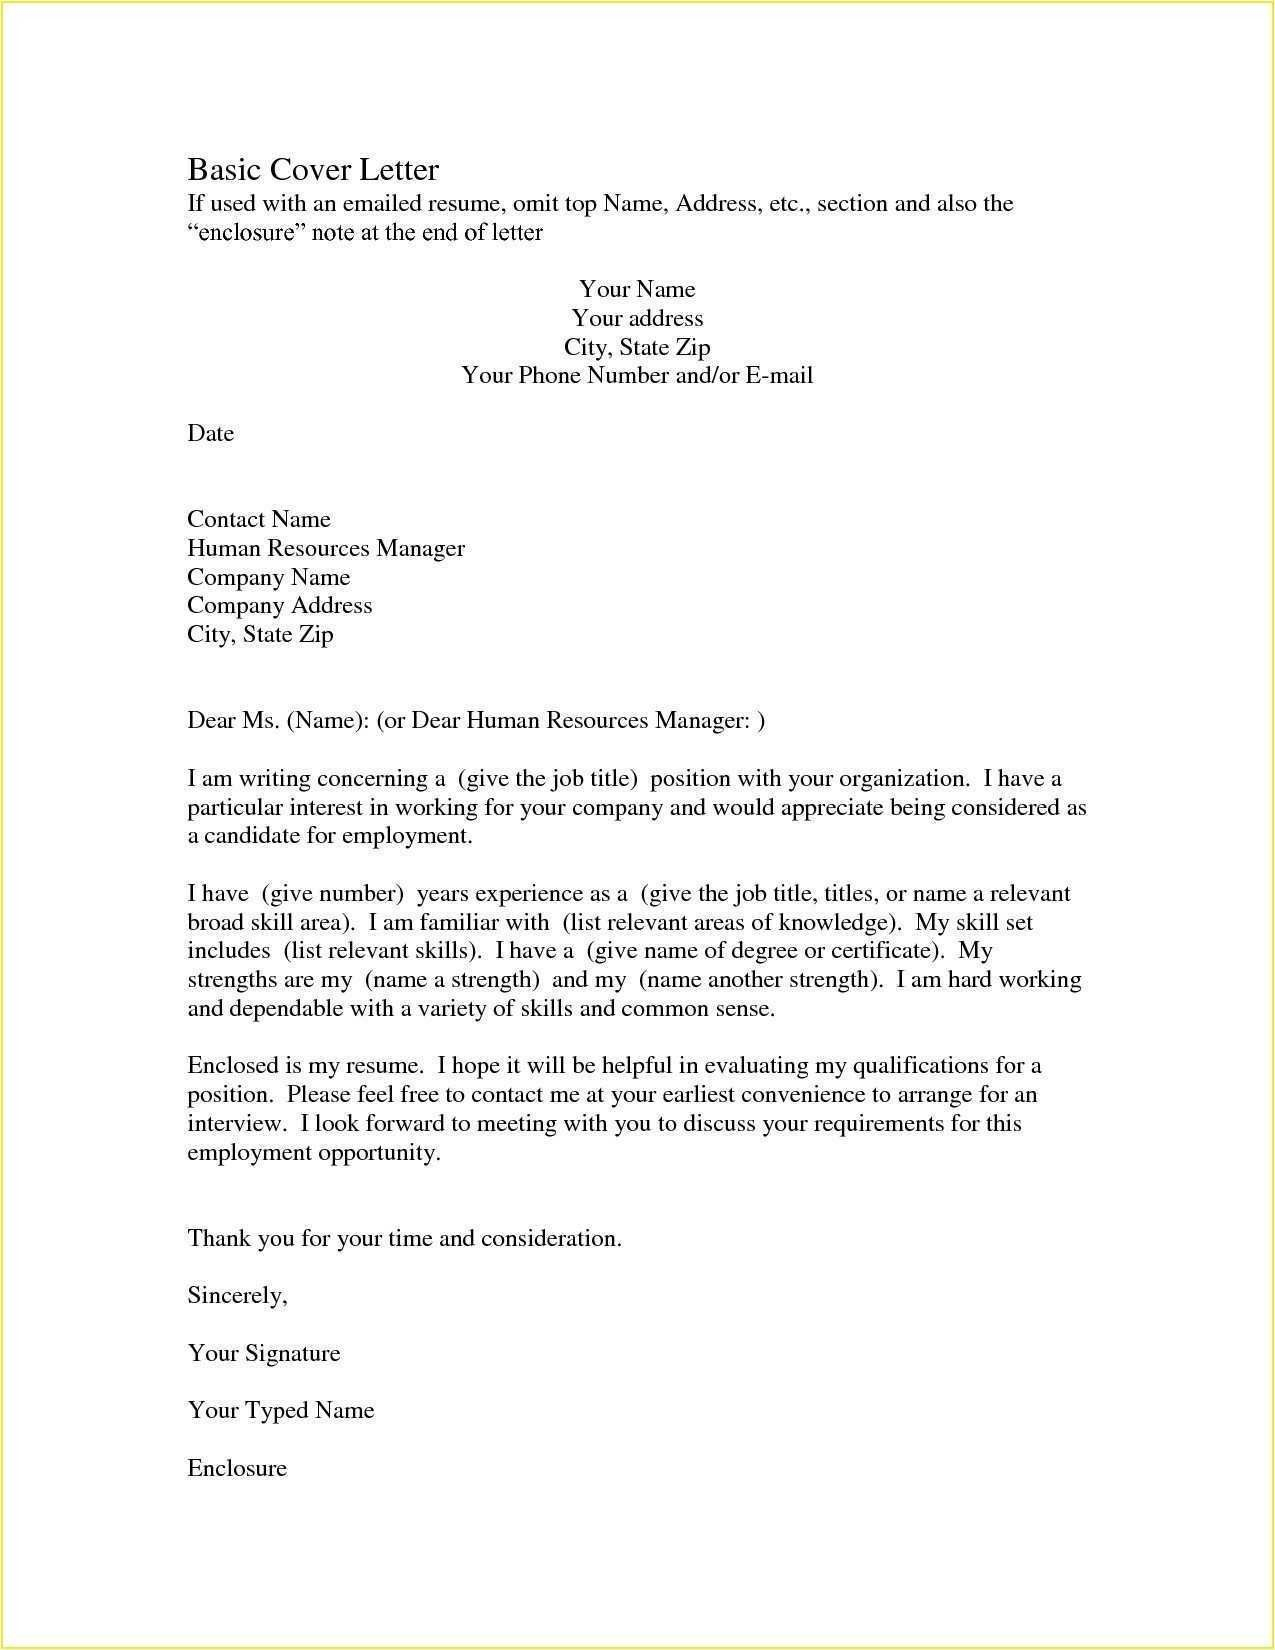 Download Fresh Ending A Job Application Letter Lettersample pertaining to dimensions 1275 X 1650